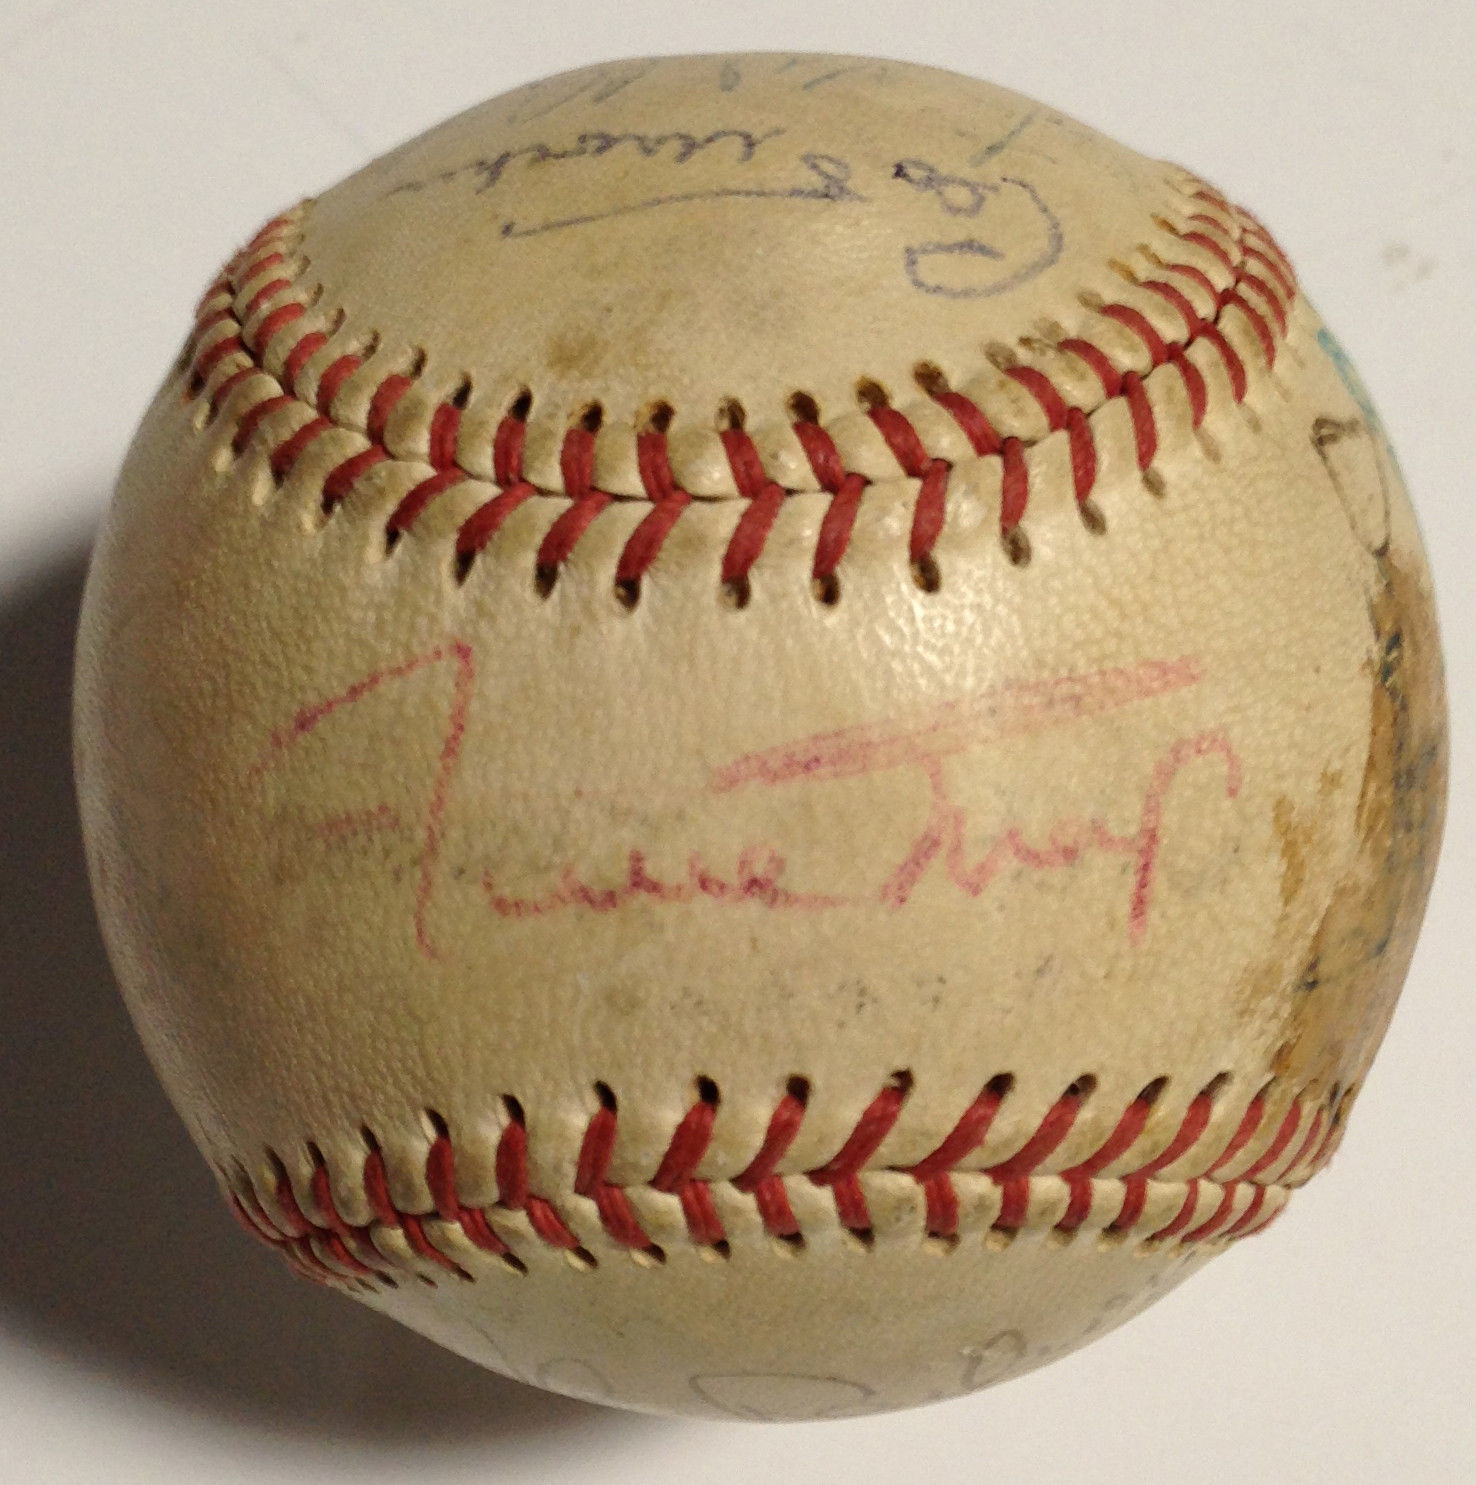 Willie Mays, DiMaggio, Rose and more Baseball Legends Signed Auto Vintage Ball